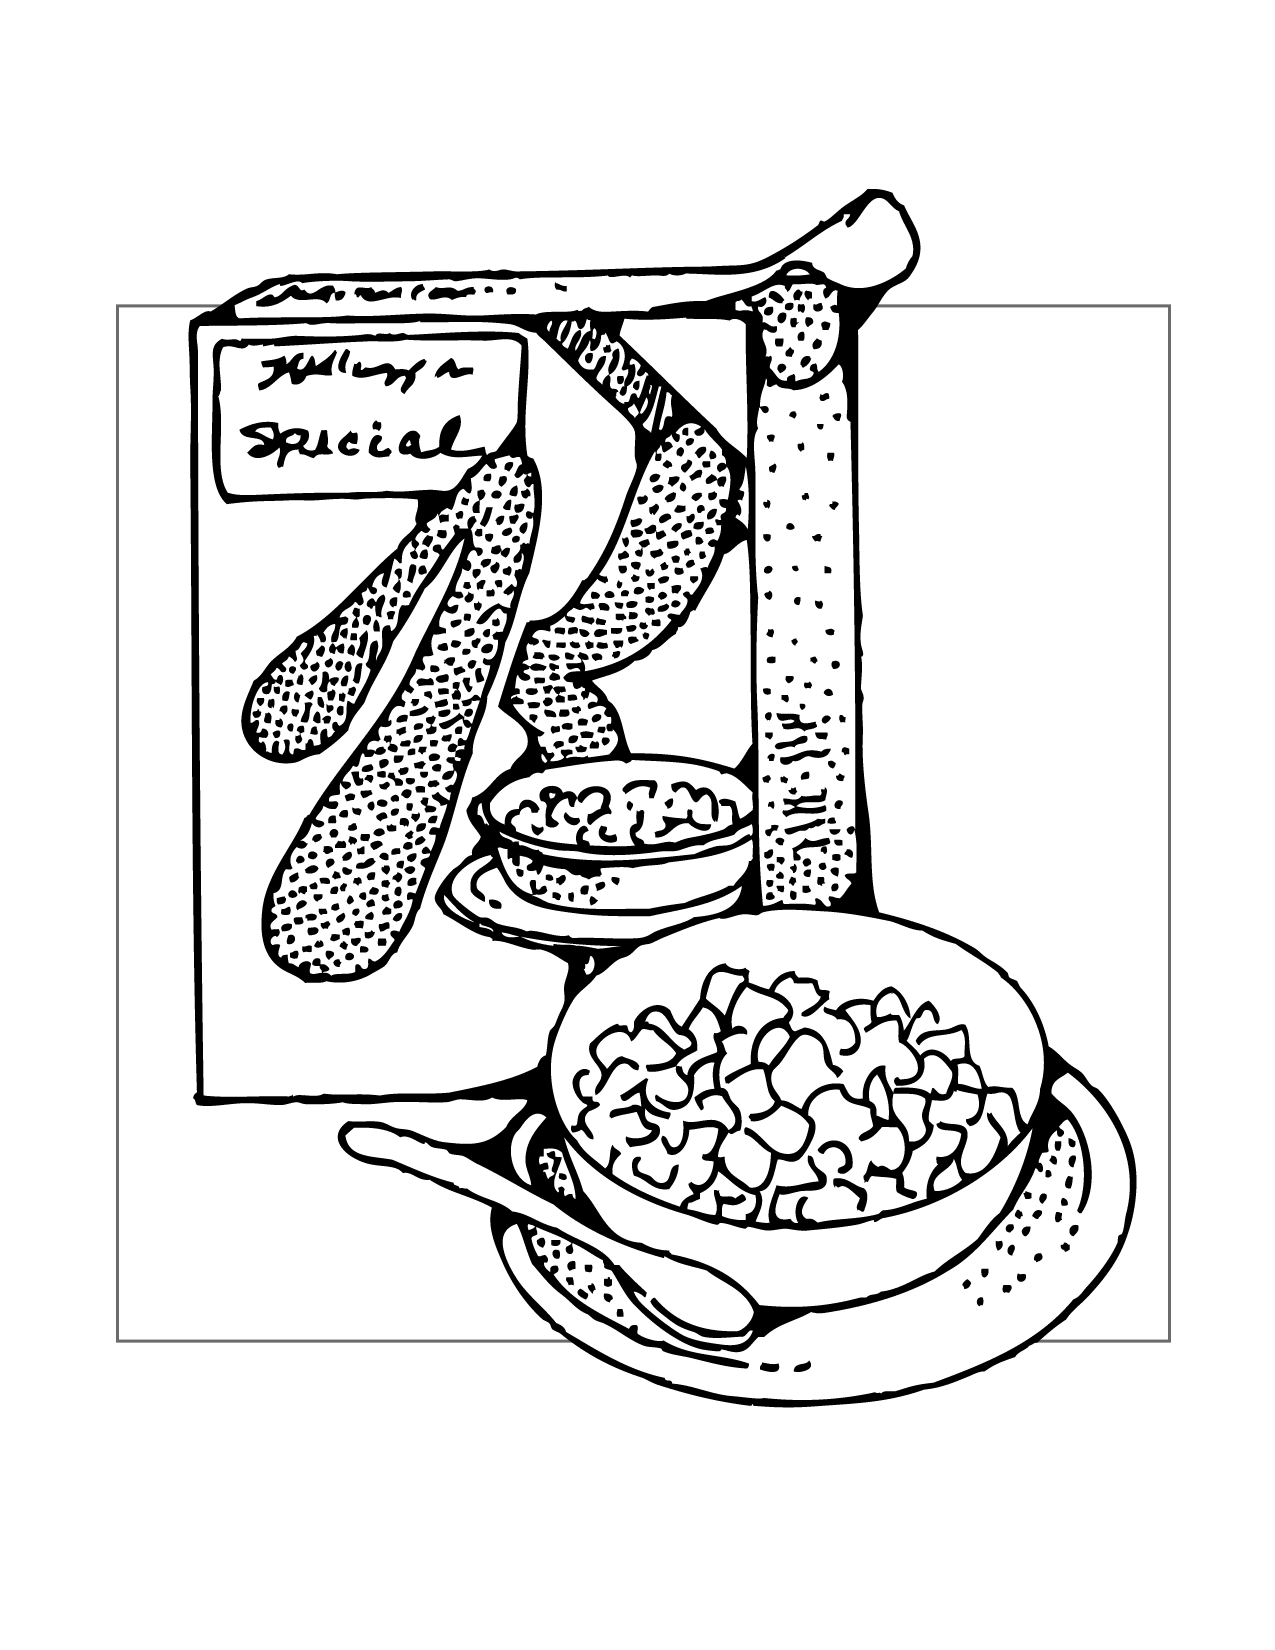 Breakfast Cereal Coloring Page